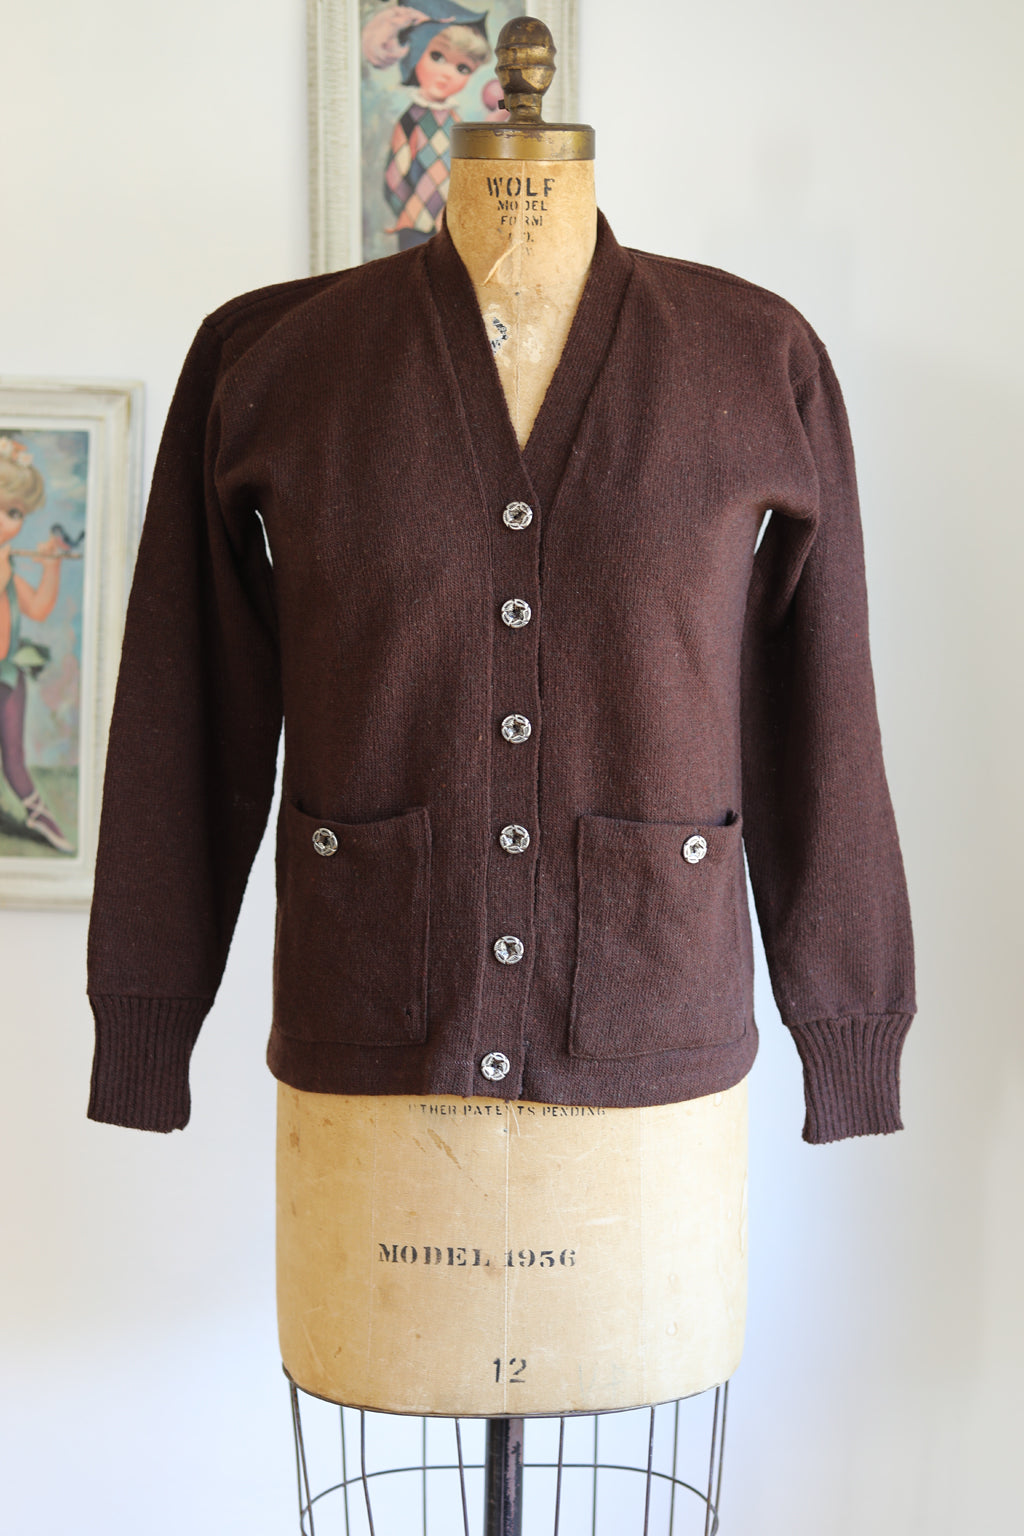 Vintage DEADSTOCK 1940s Knit Cardigan - Chocolate Brown All-Wool Lambswool Sporty Knitwear Sweater w Pockets - Choose Yours!